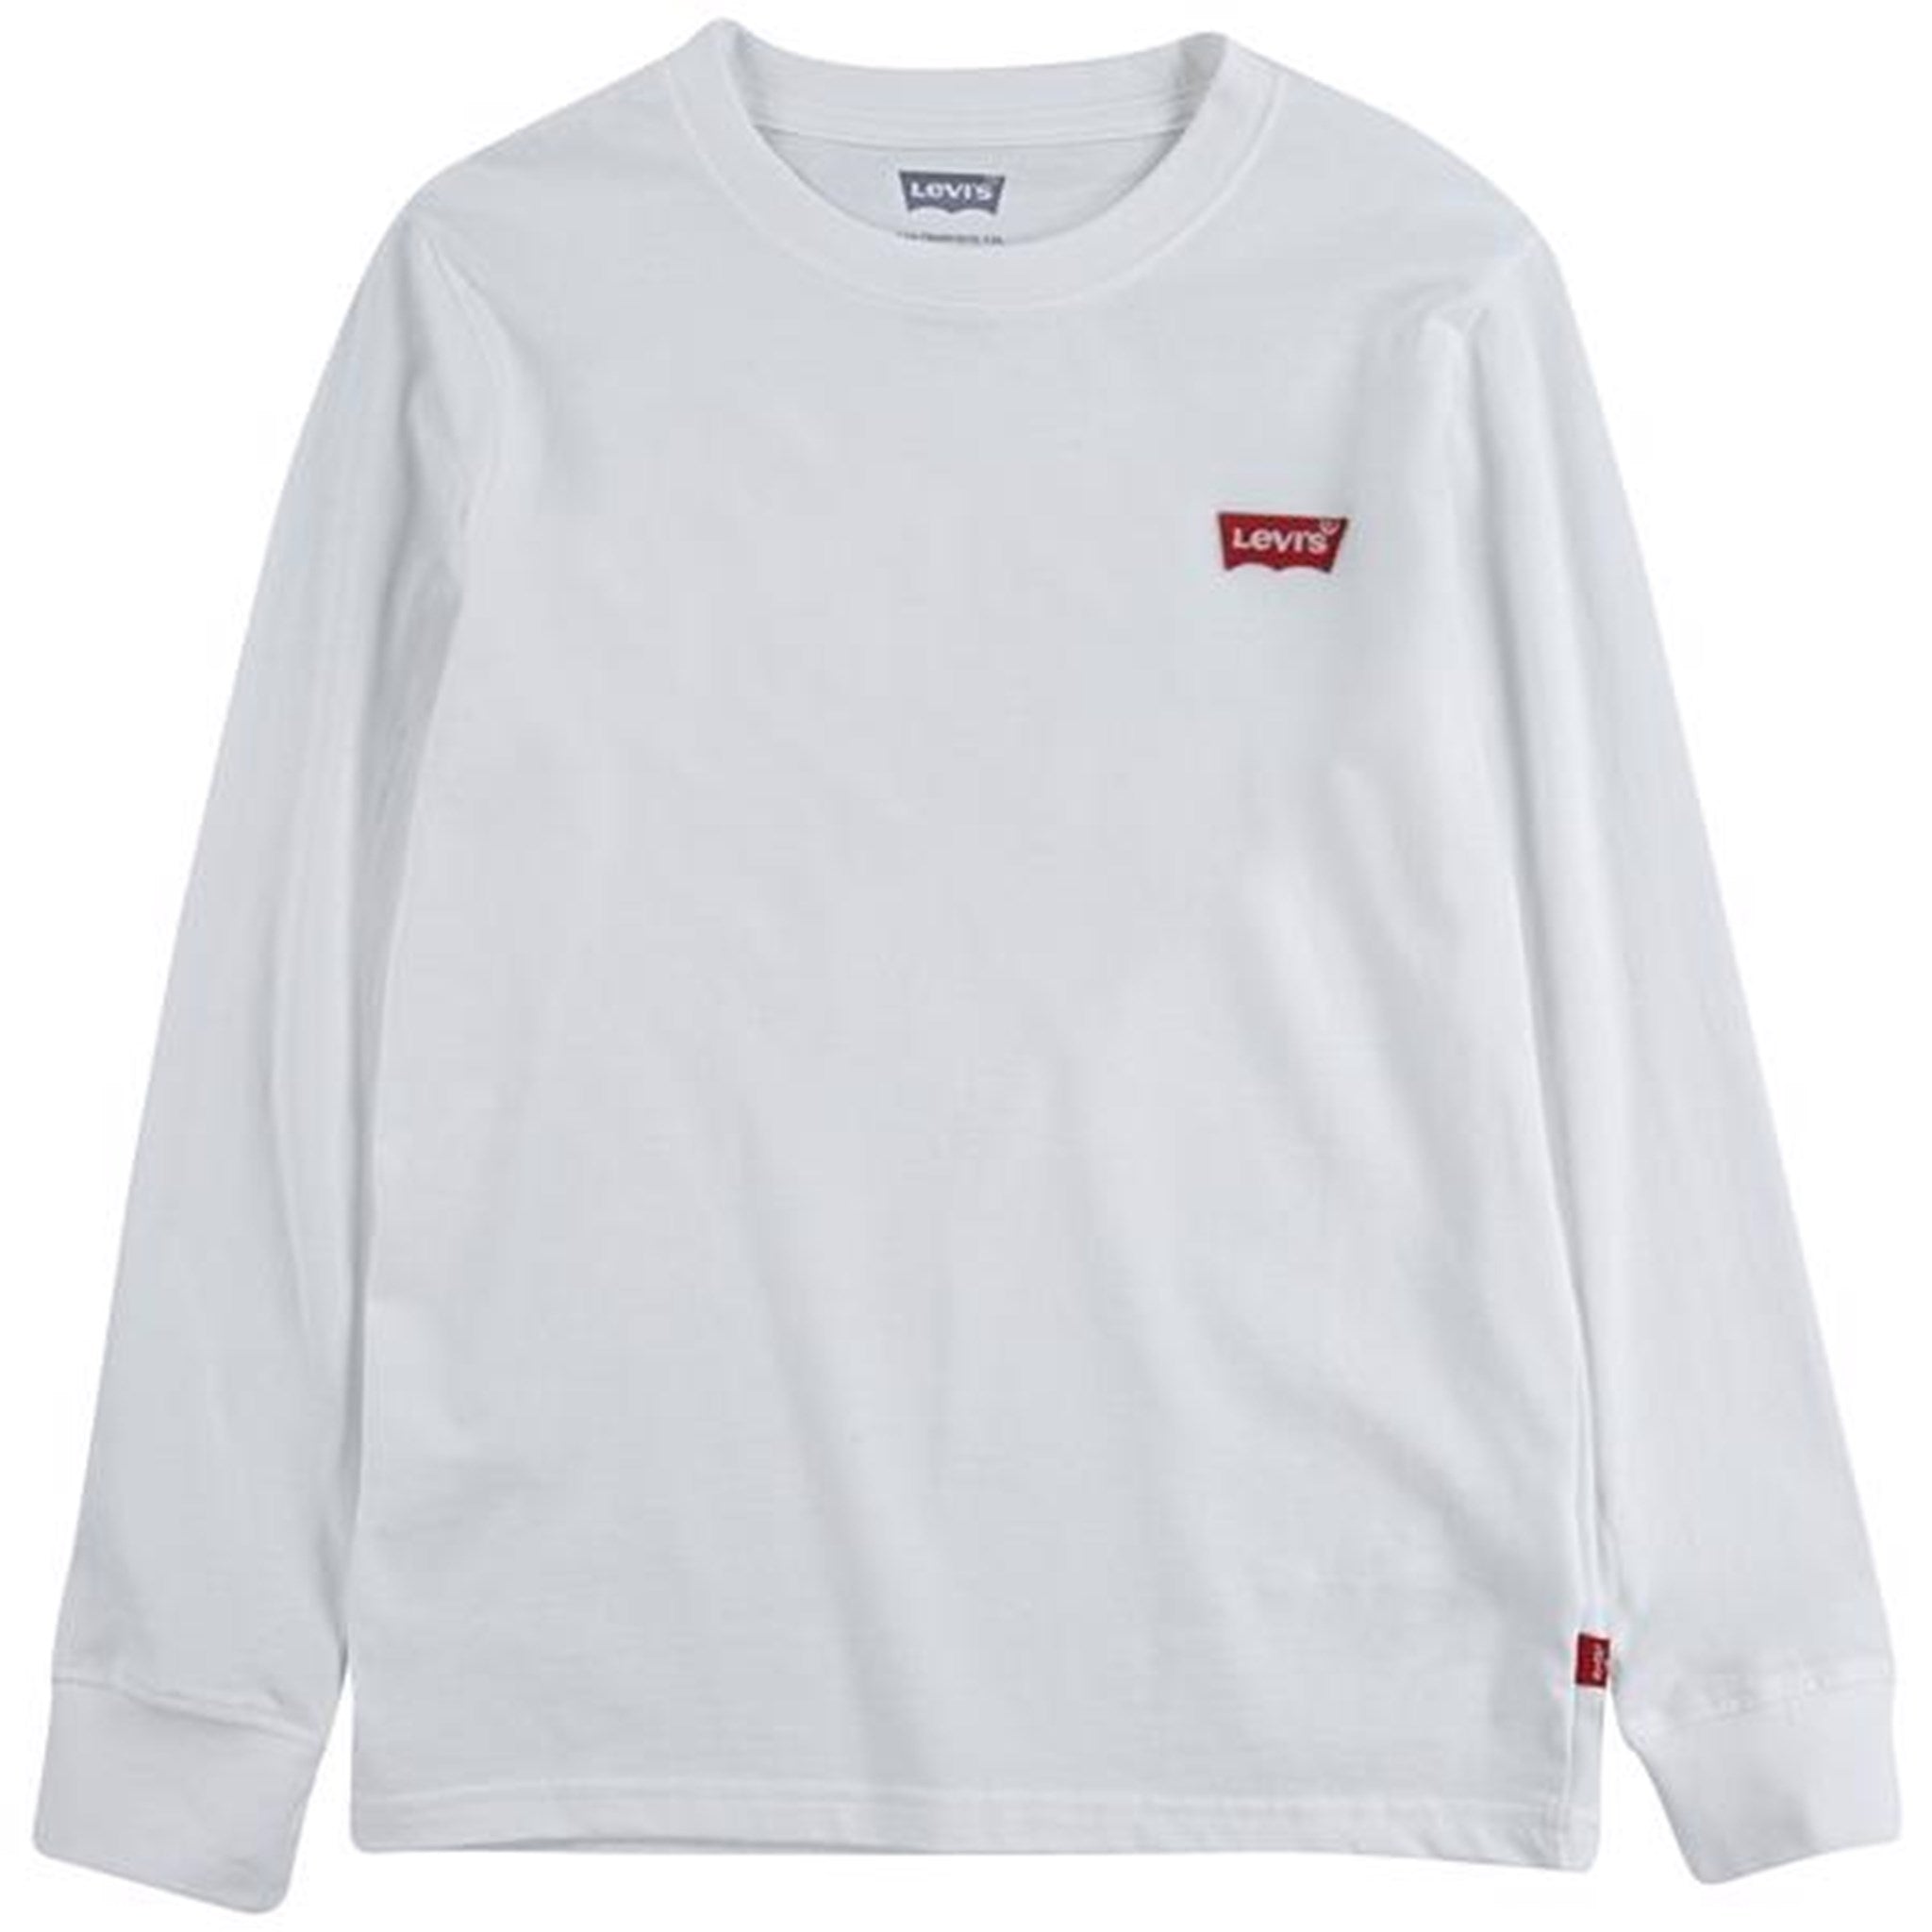 Levi's Batwing Chesthit Blus White